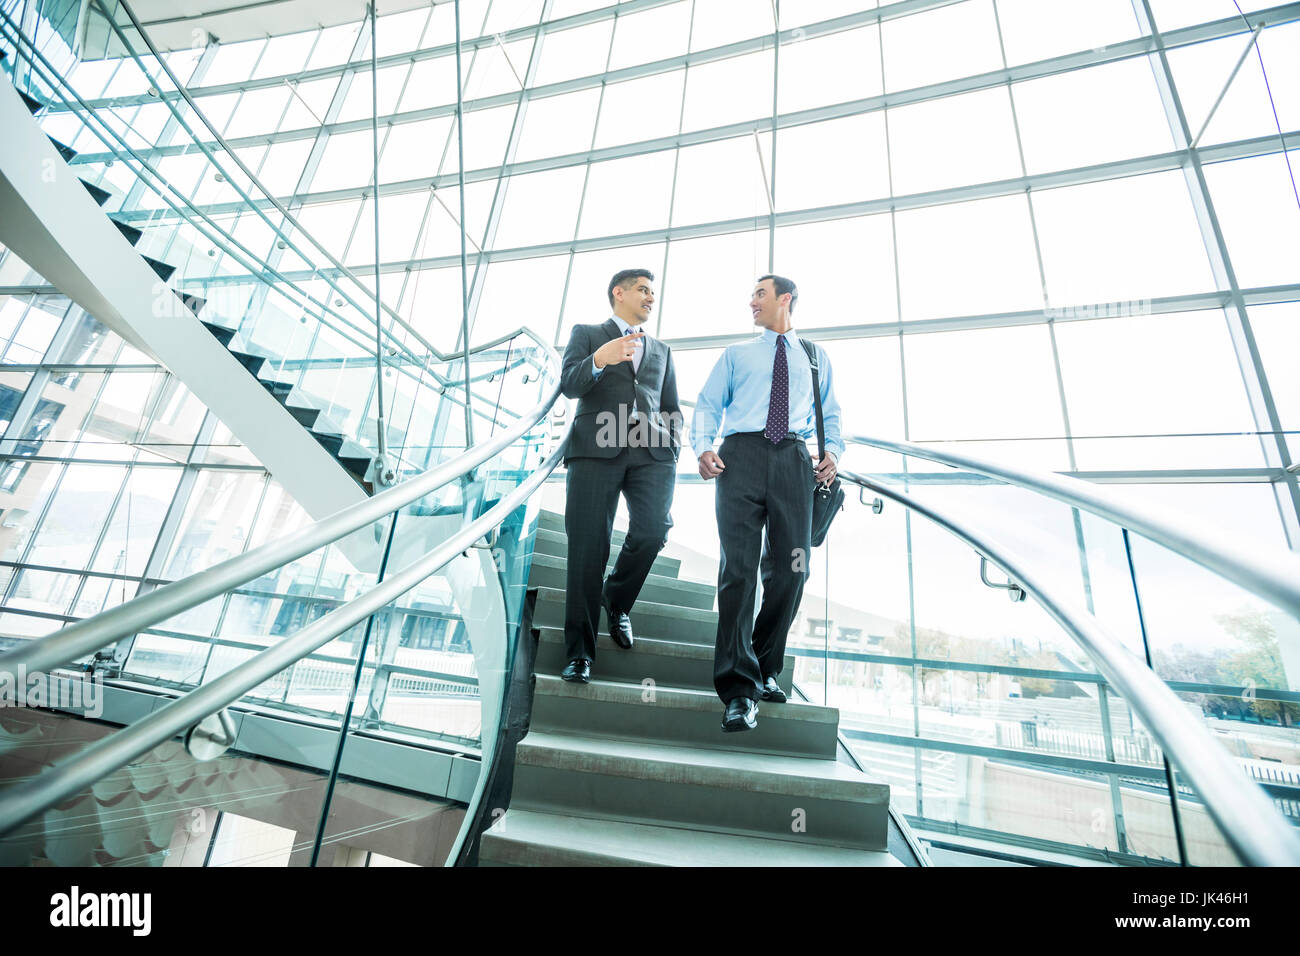 Smiling Mixed Race businessmen descending staircase and talking Stock Photo